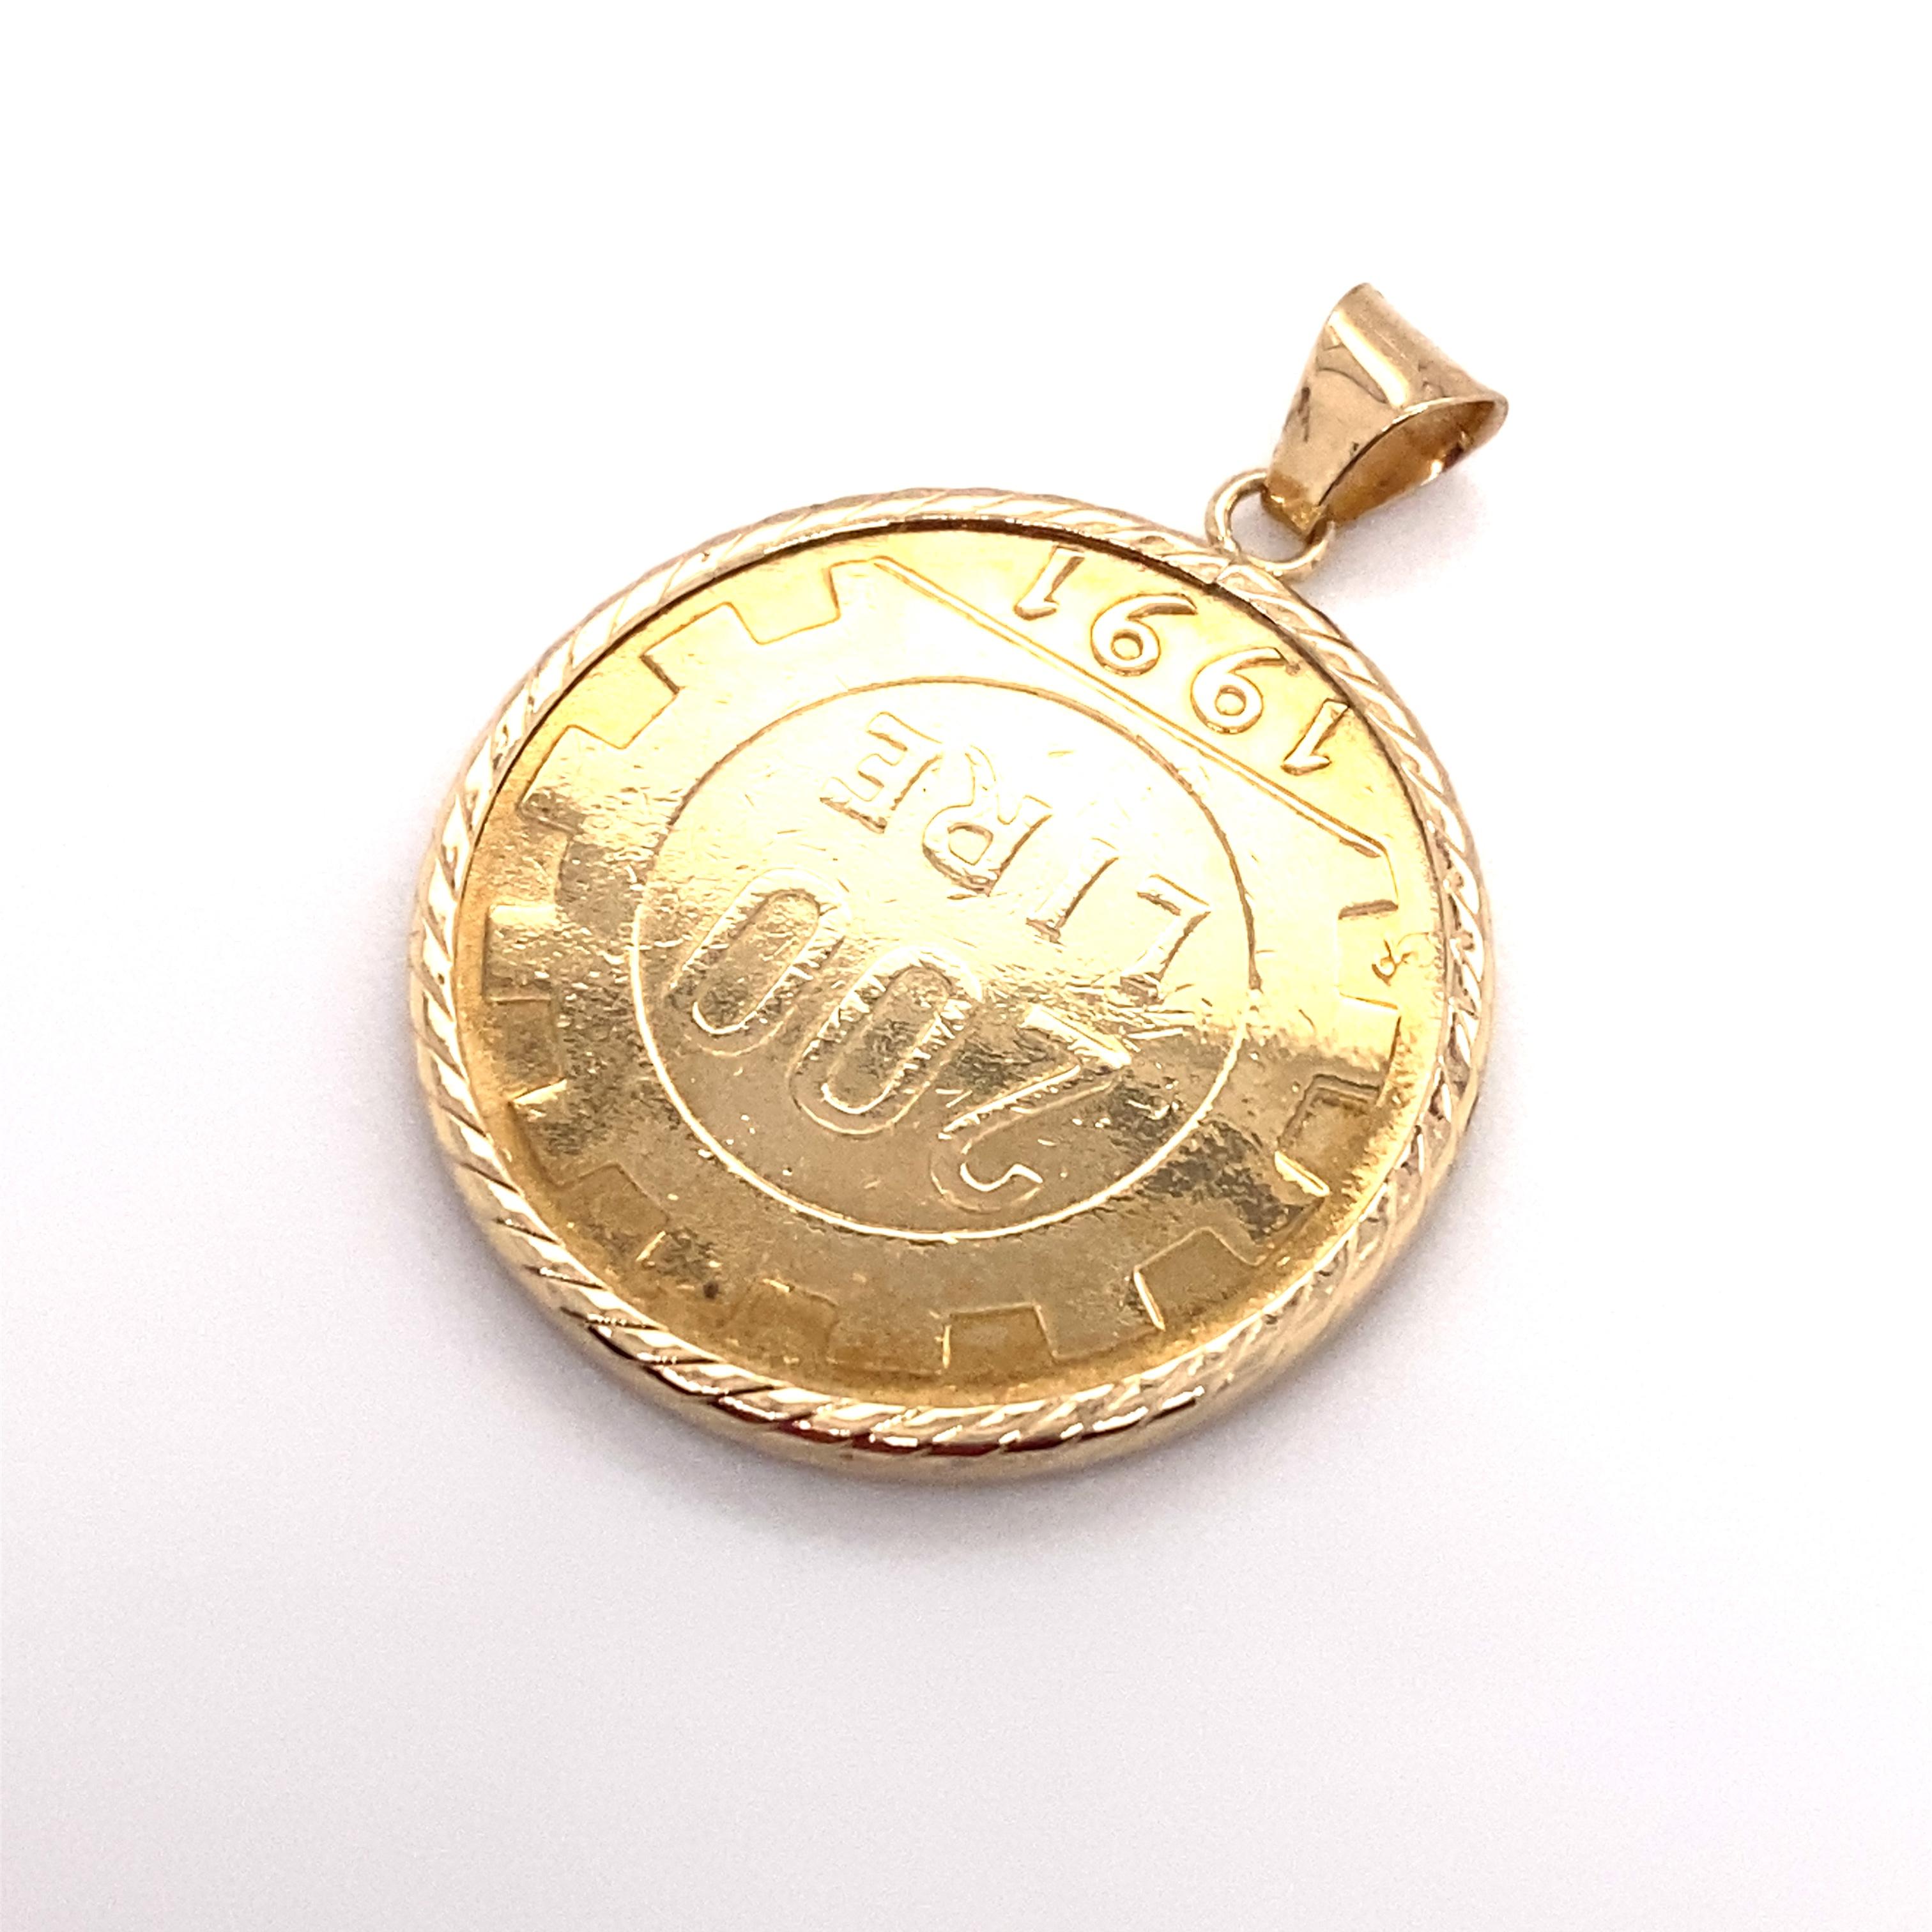 This unique pendant has an Italian 200 Lire coin from 1991. Set in a 14 k gold bezel.

Circa: 1990s
Metal Type: 14 Karat Yellow Gold
Weight: 5.6 grams
Dimensions: 1 in Length